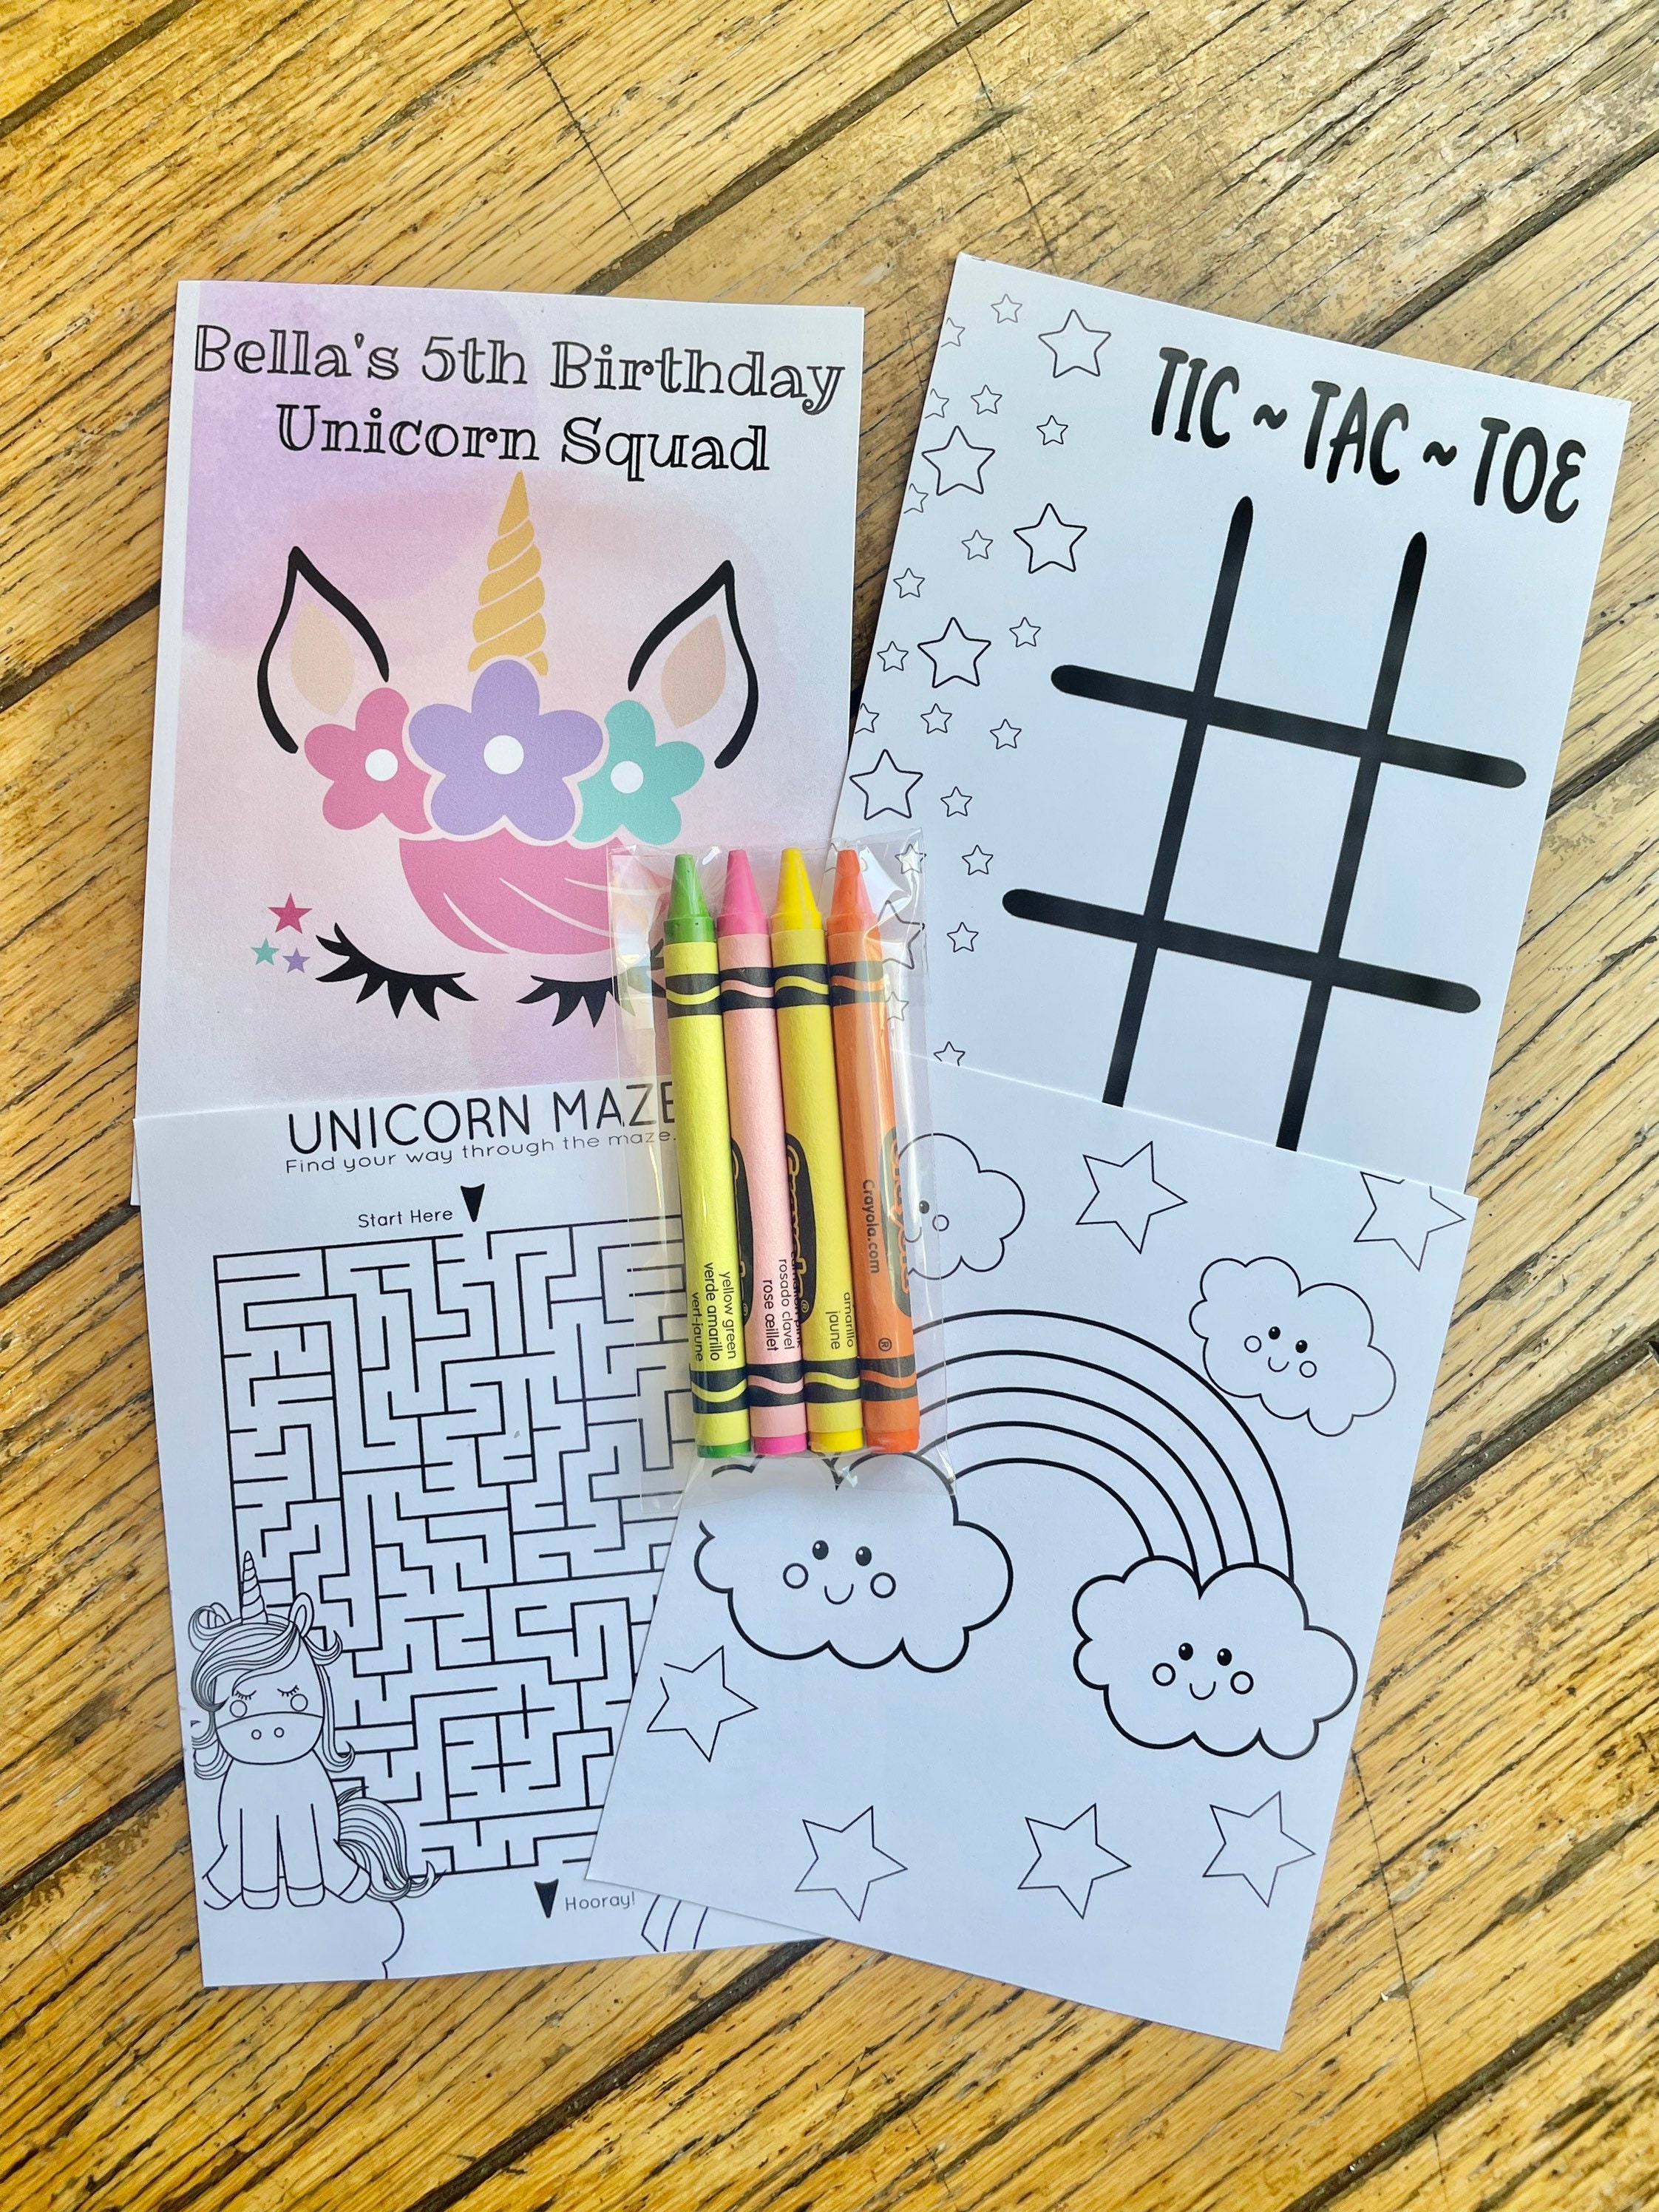 Unicorn Coloring Kit Favors With Personalized Coloring Pages/ Unicorn Party  Favors /unicorn Birthday Favors /unicorns / Party Favor 